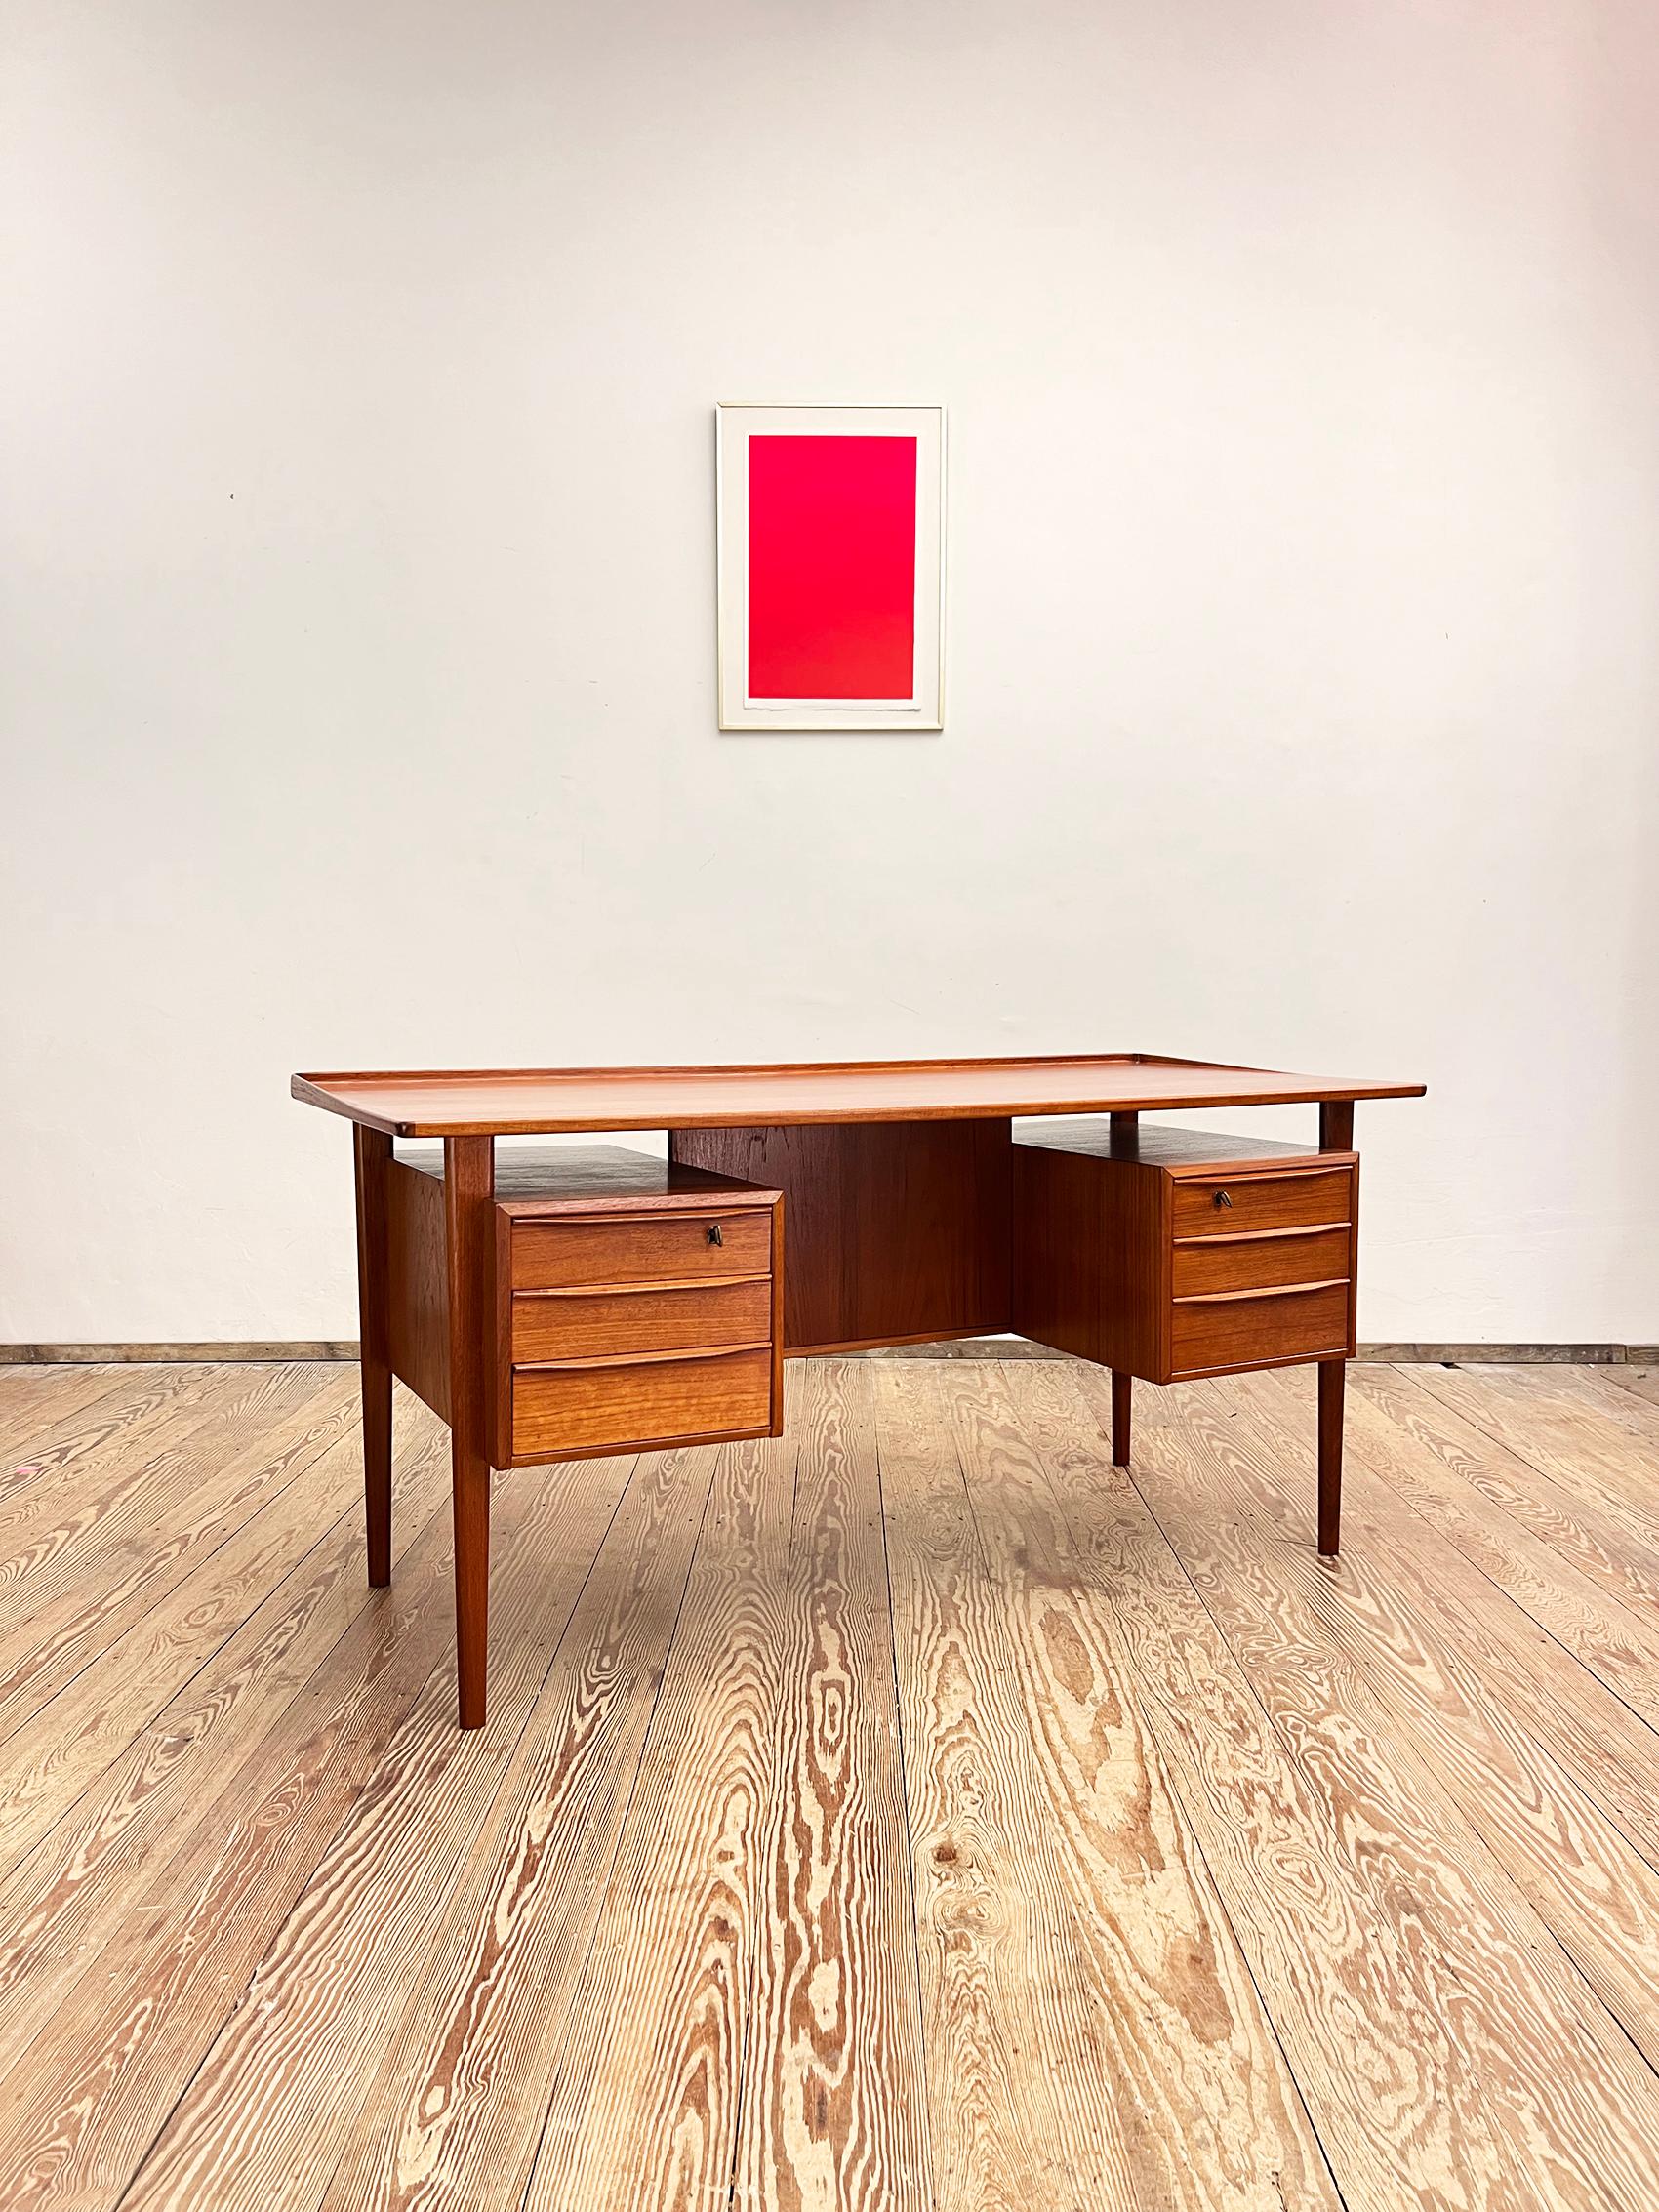 Dimensions 74 cm x 155 cm x 70 cm (Depth x Width x Height)


This free standing midcentury danish writing desk was designed by Peter Løvig Nielsen, produced by Hedensted Møbelfabrik Denmark in 1977. The table is made of teak wood and features two